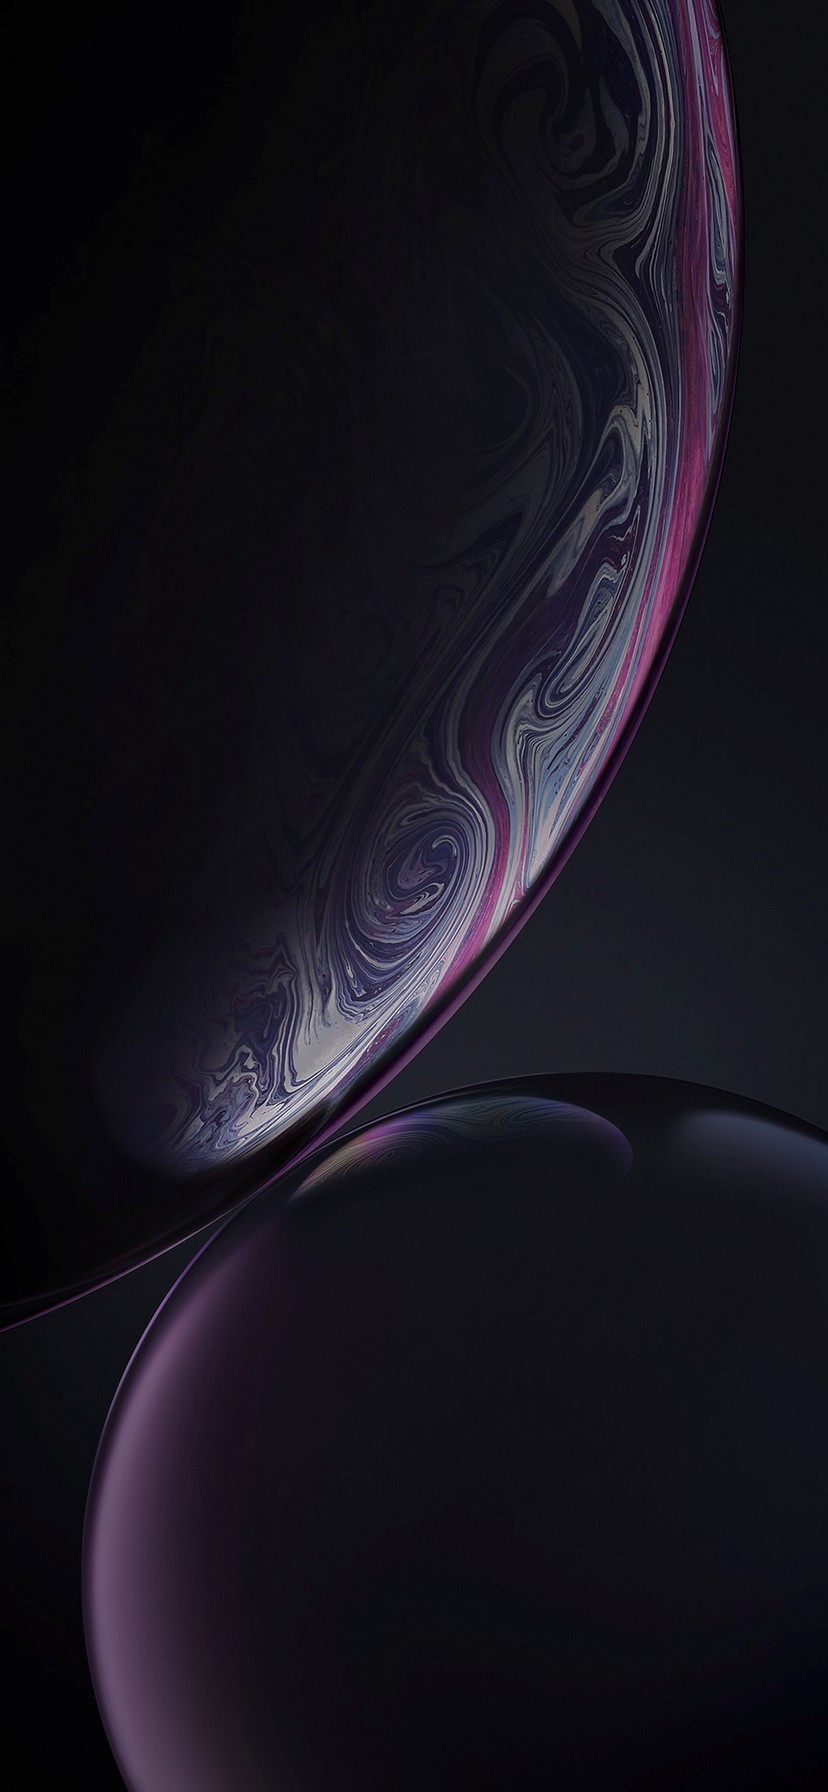 Iphone Xr Wallpaper Lock Screen With High-resolution - Iphone Wallpaper -  828x1792 Wallpaper 